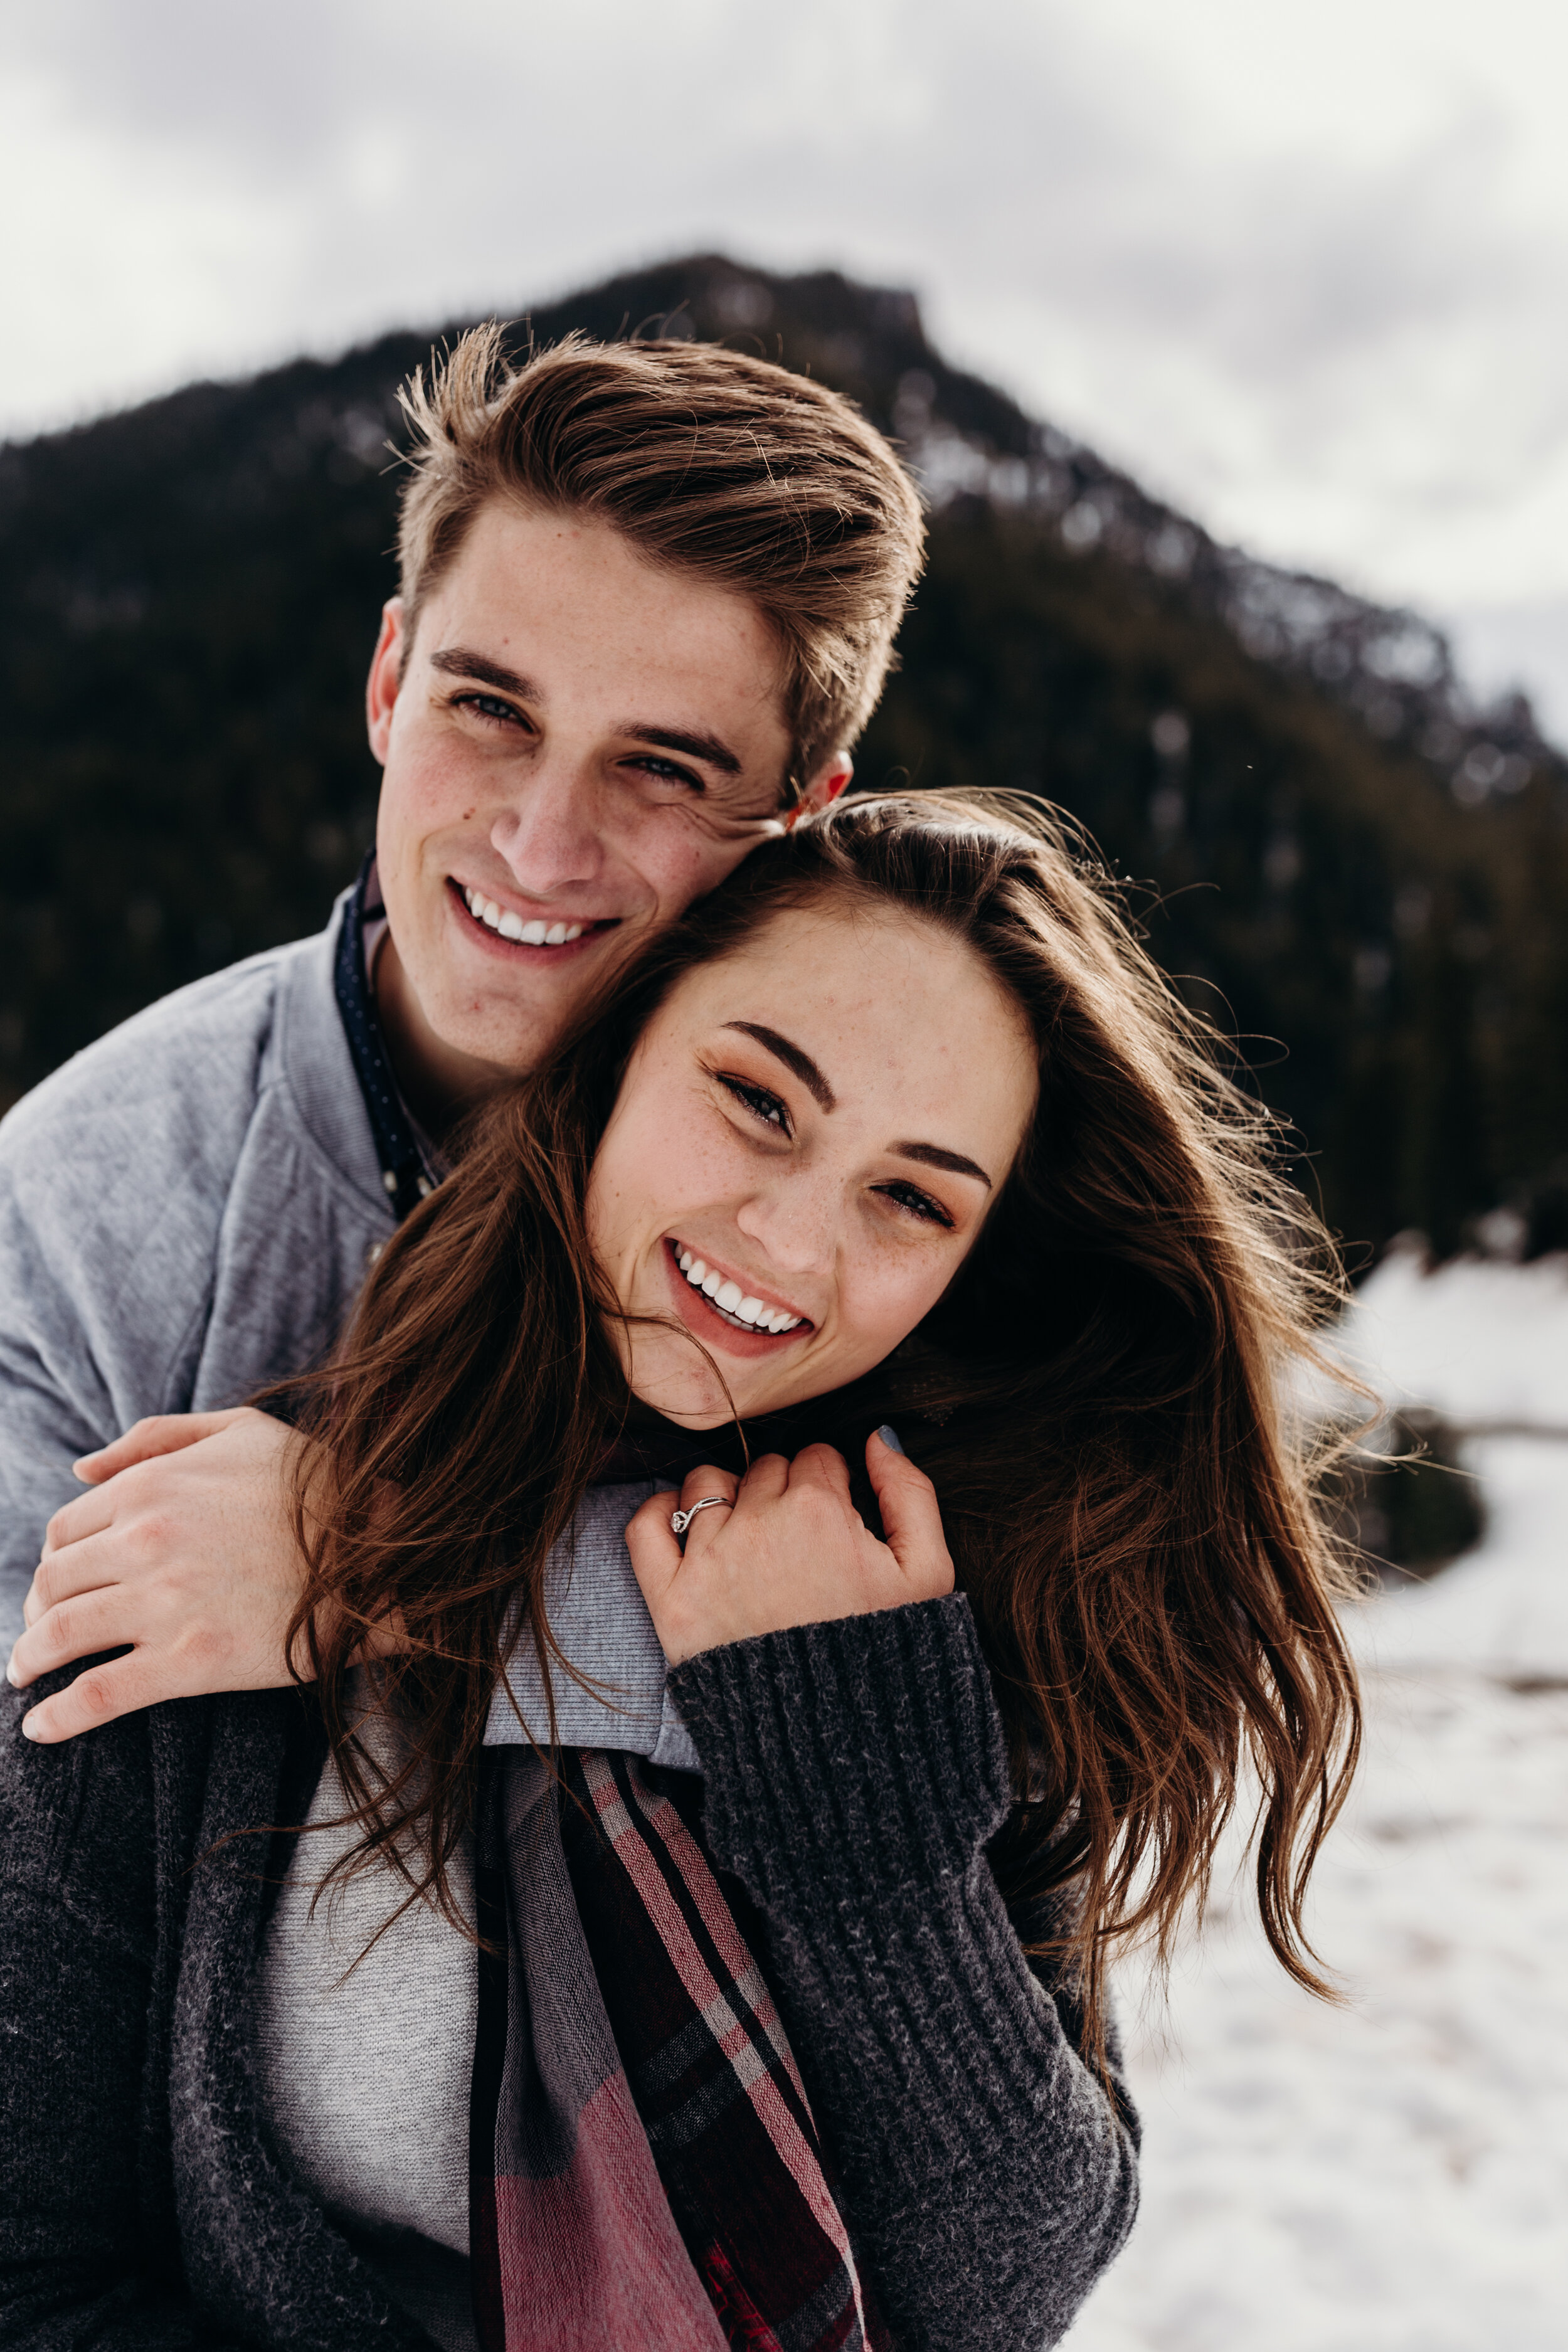 Snowy winter mountain engagements windy hair pine trees laughing couple shoot #coupleshoot #utahphotographer #weddingphotographer #engagements #engagementshoot #winterengagements